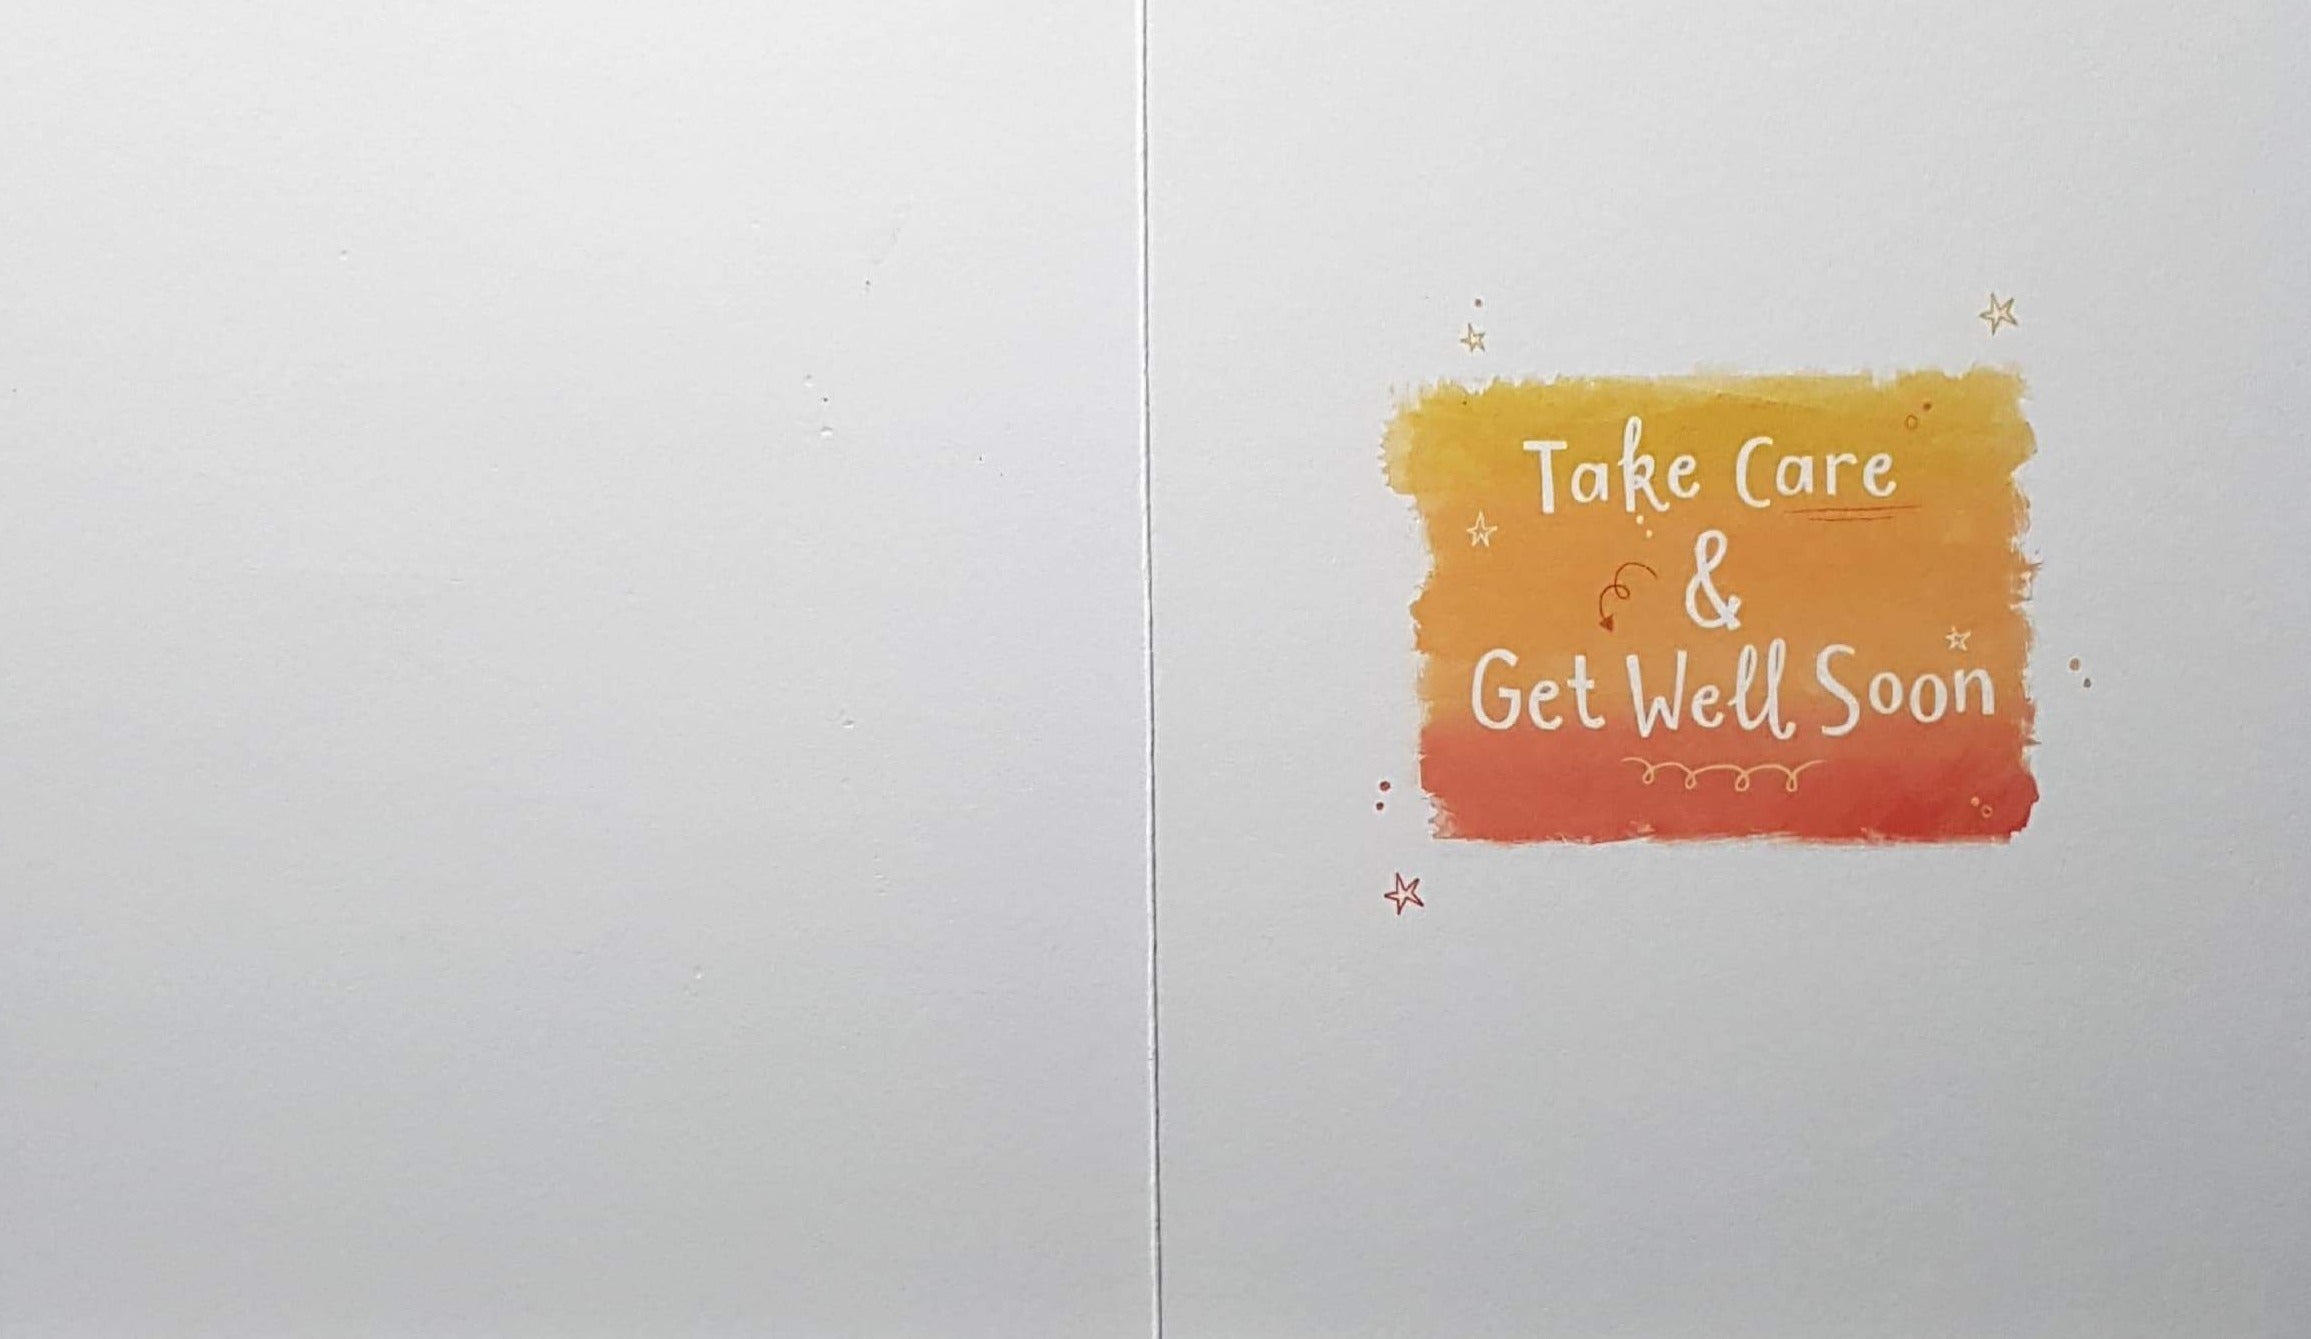 Get Well Card - Yellow & Orange Label With White Letters